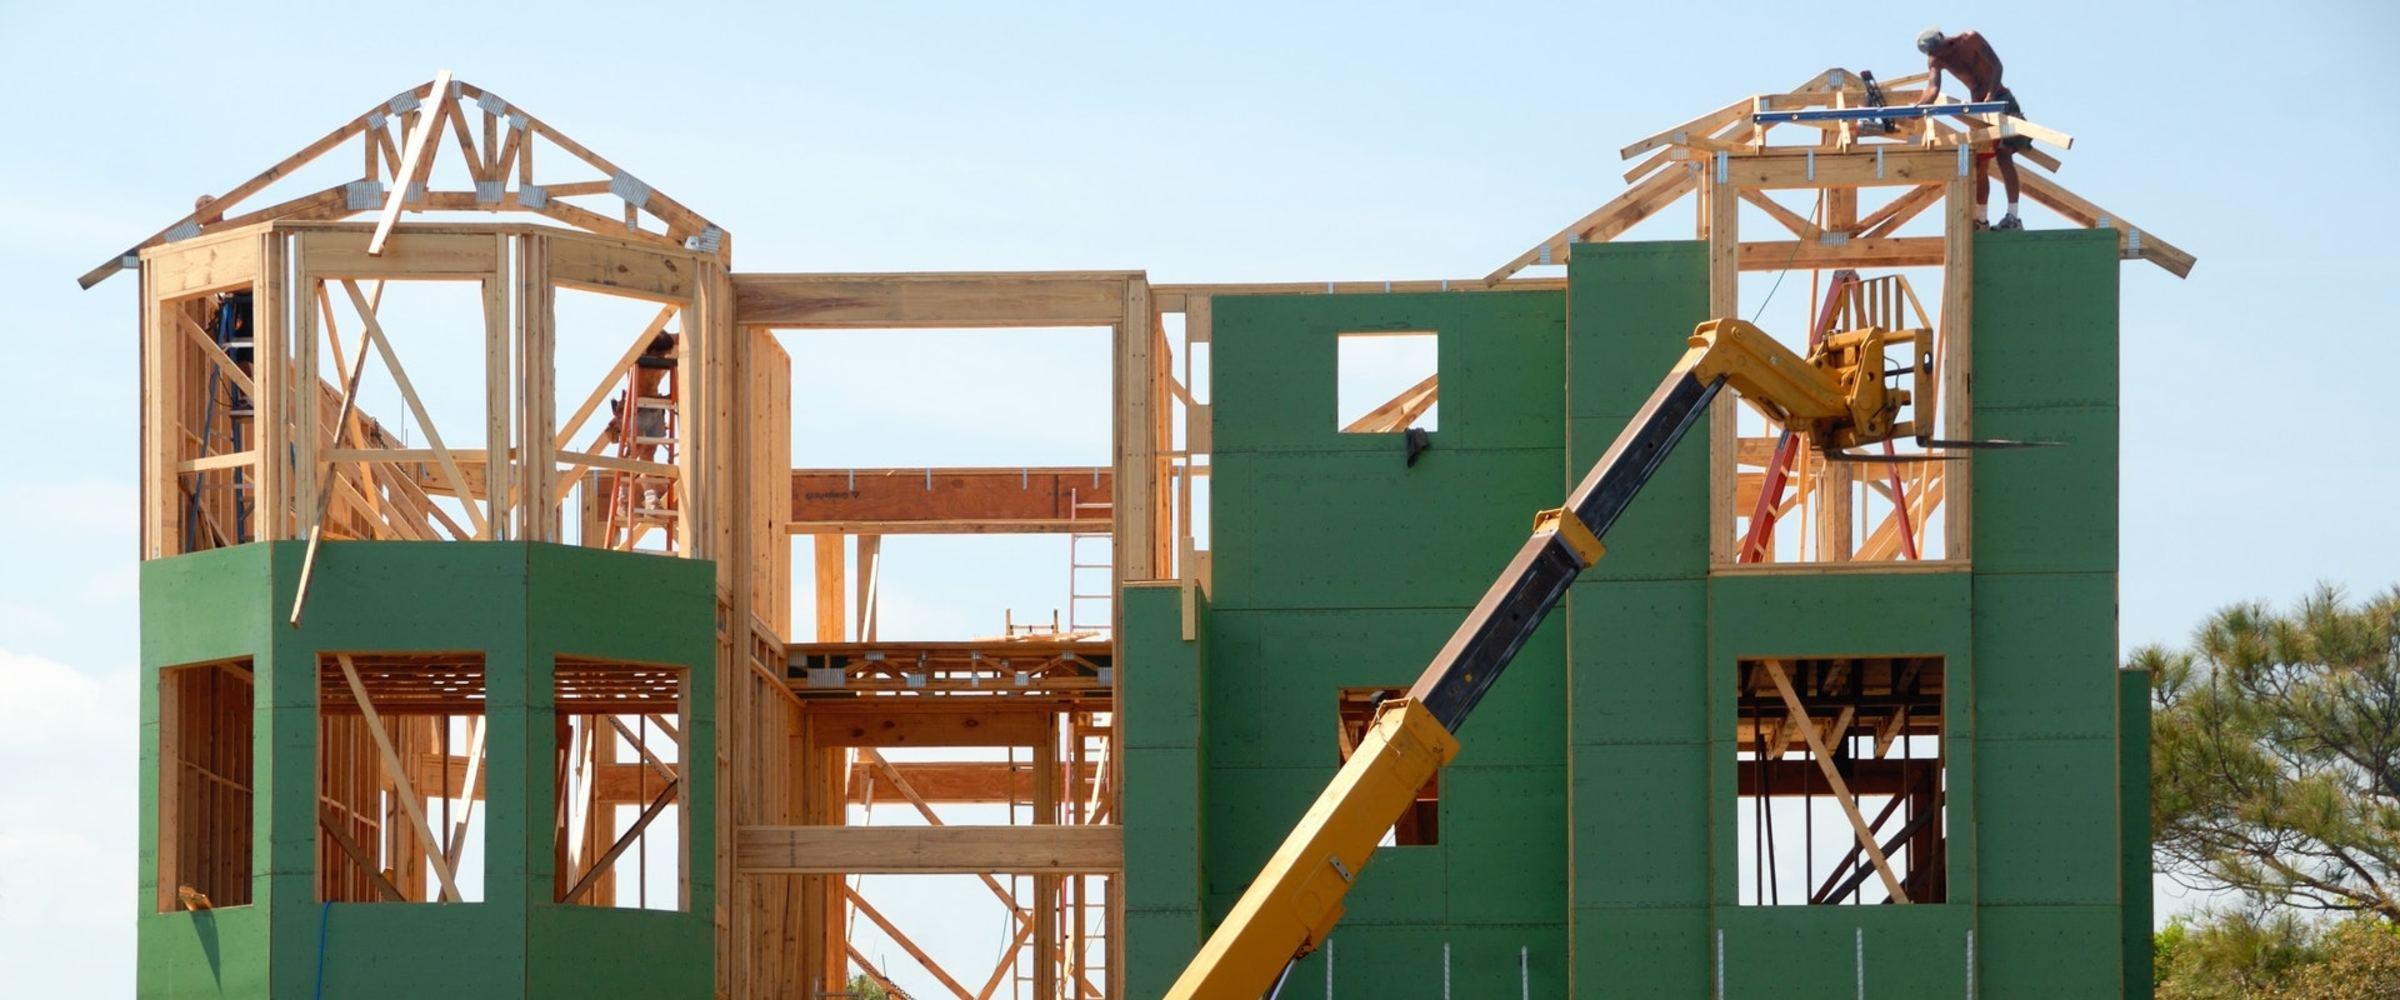 is it cheaper to construct or buy a house?